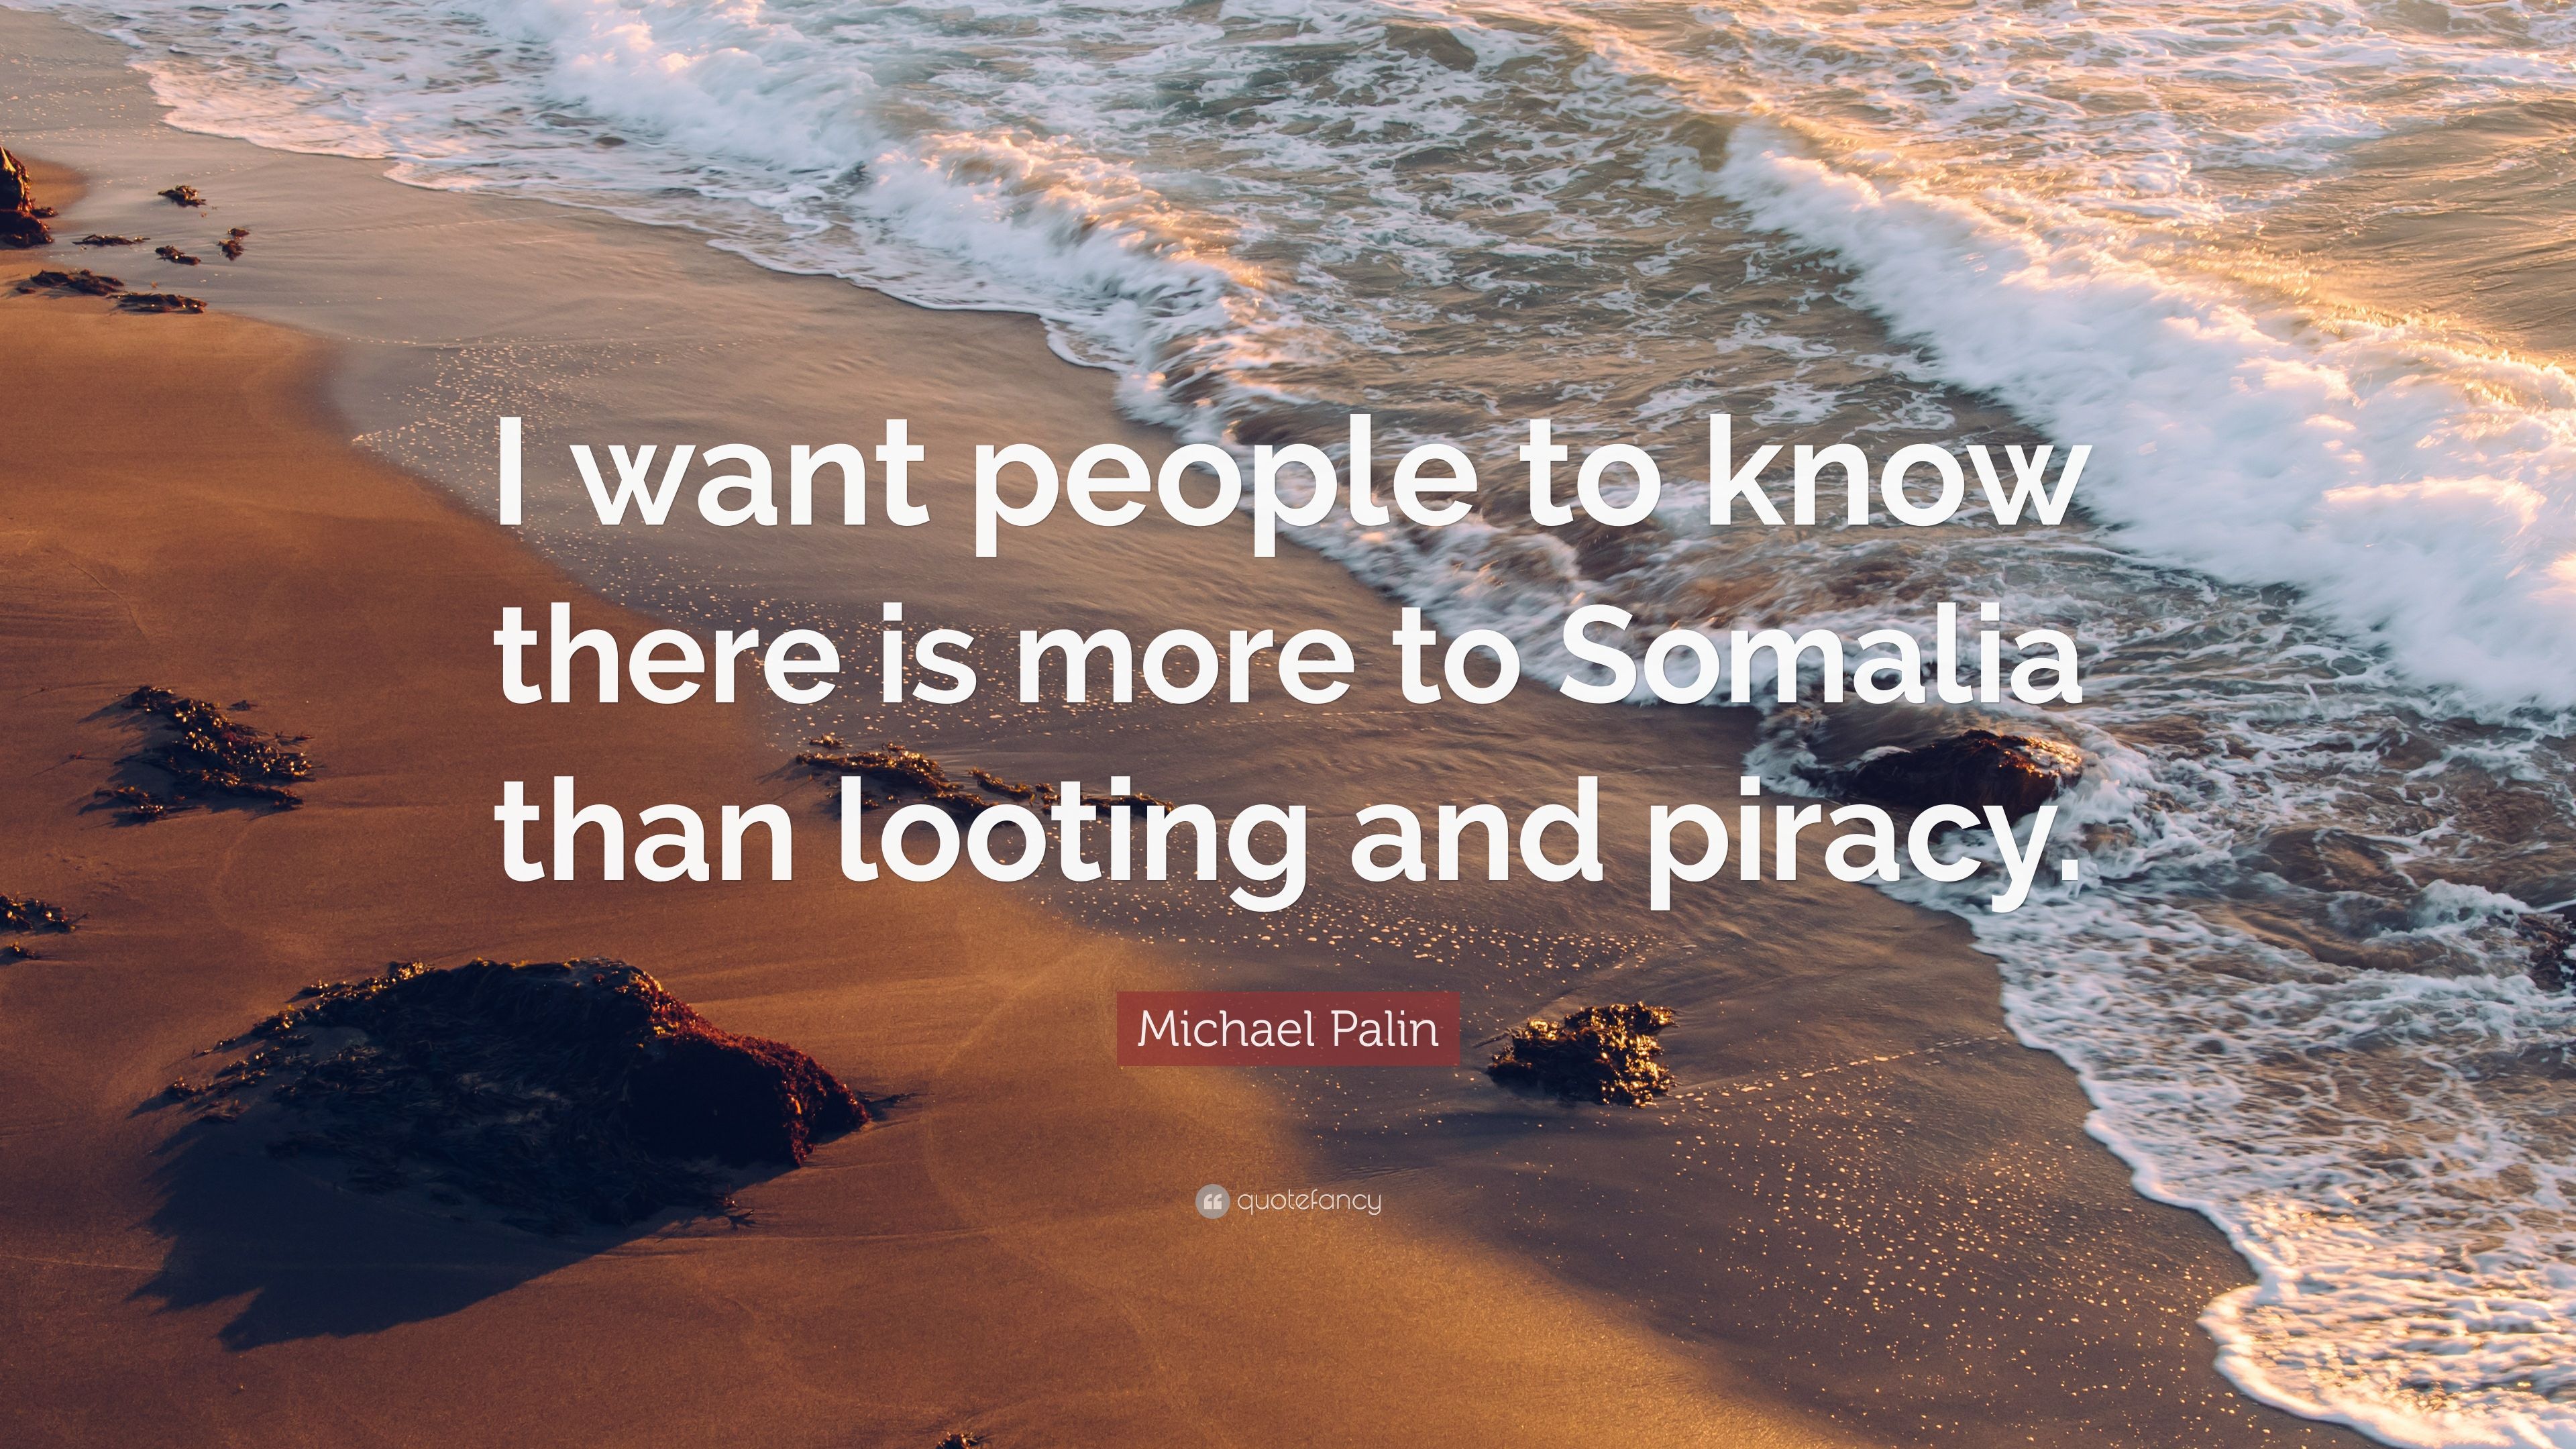 Michael Palin Quote: “I want people to know there is more to Somalia